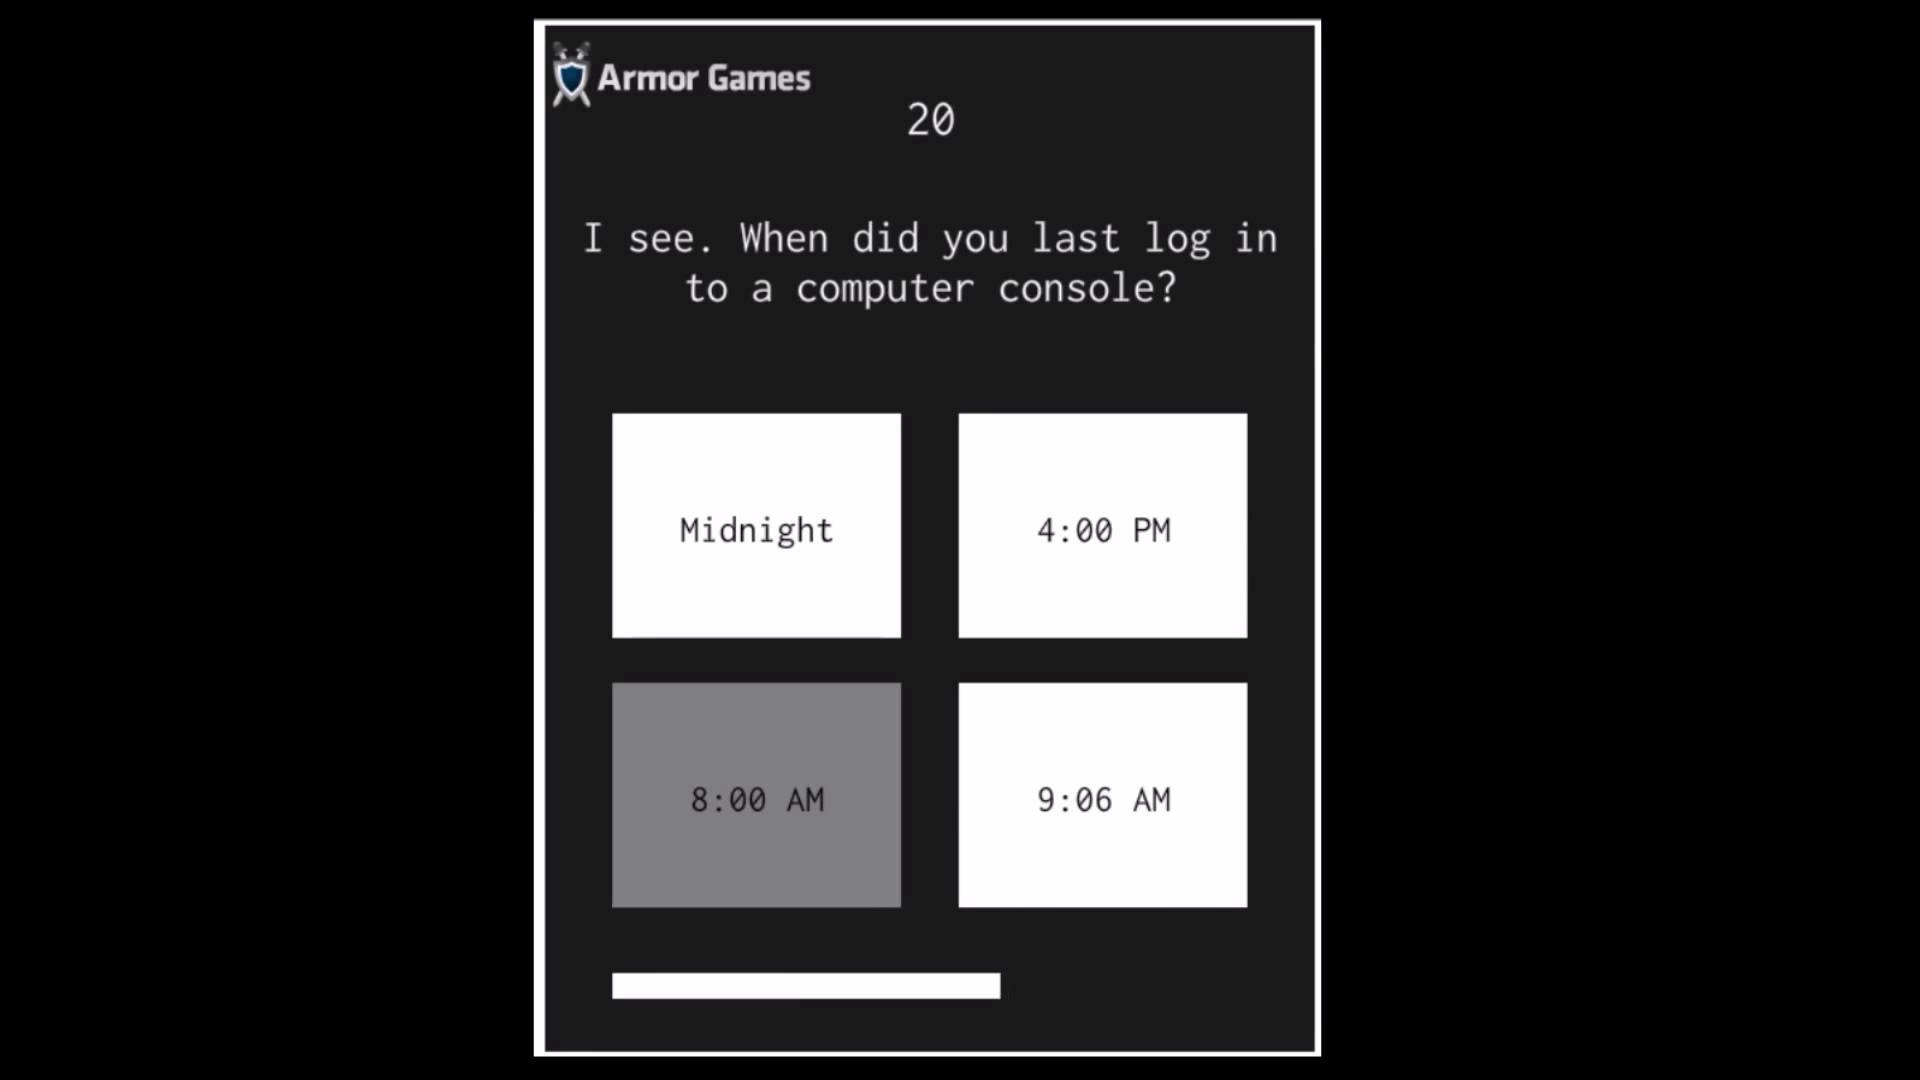 Text reads 'Armor Games. 20. When did you last log into a computer console? Midnight. 4 p m. 8 a m. 9 0 6 a m.'.